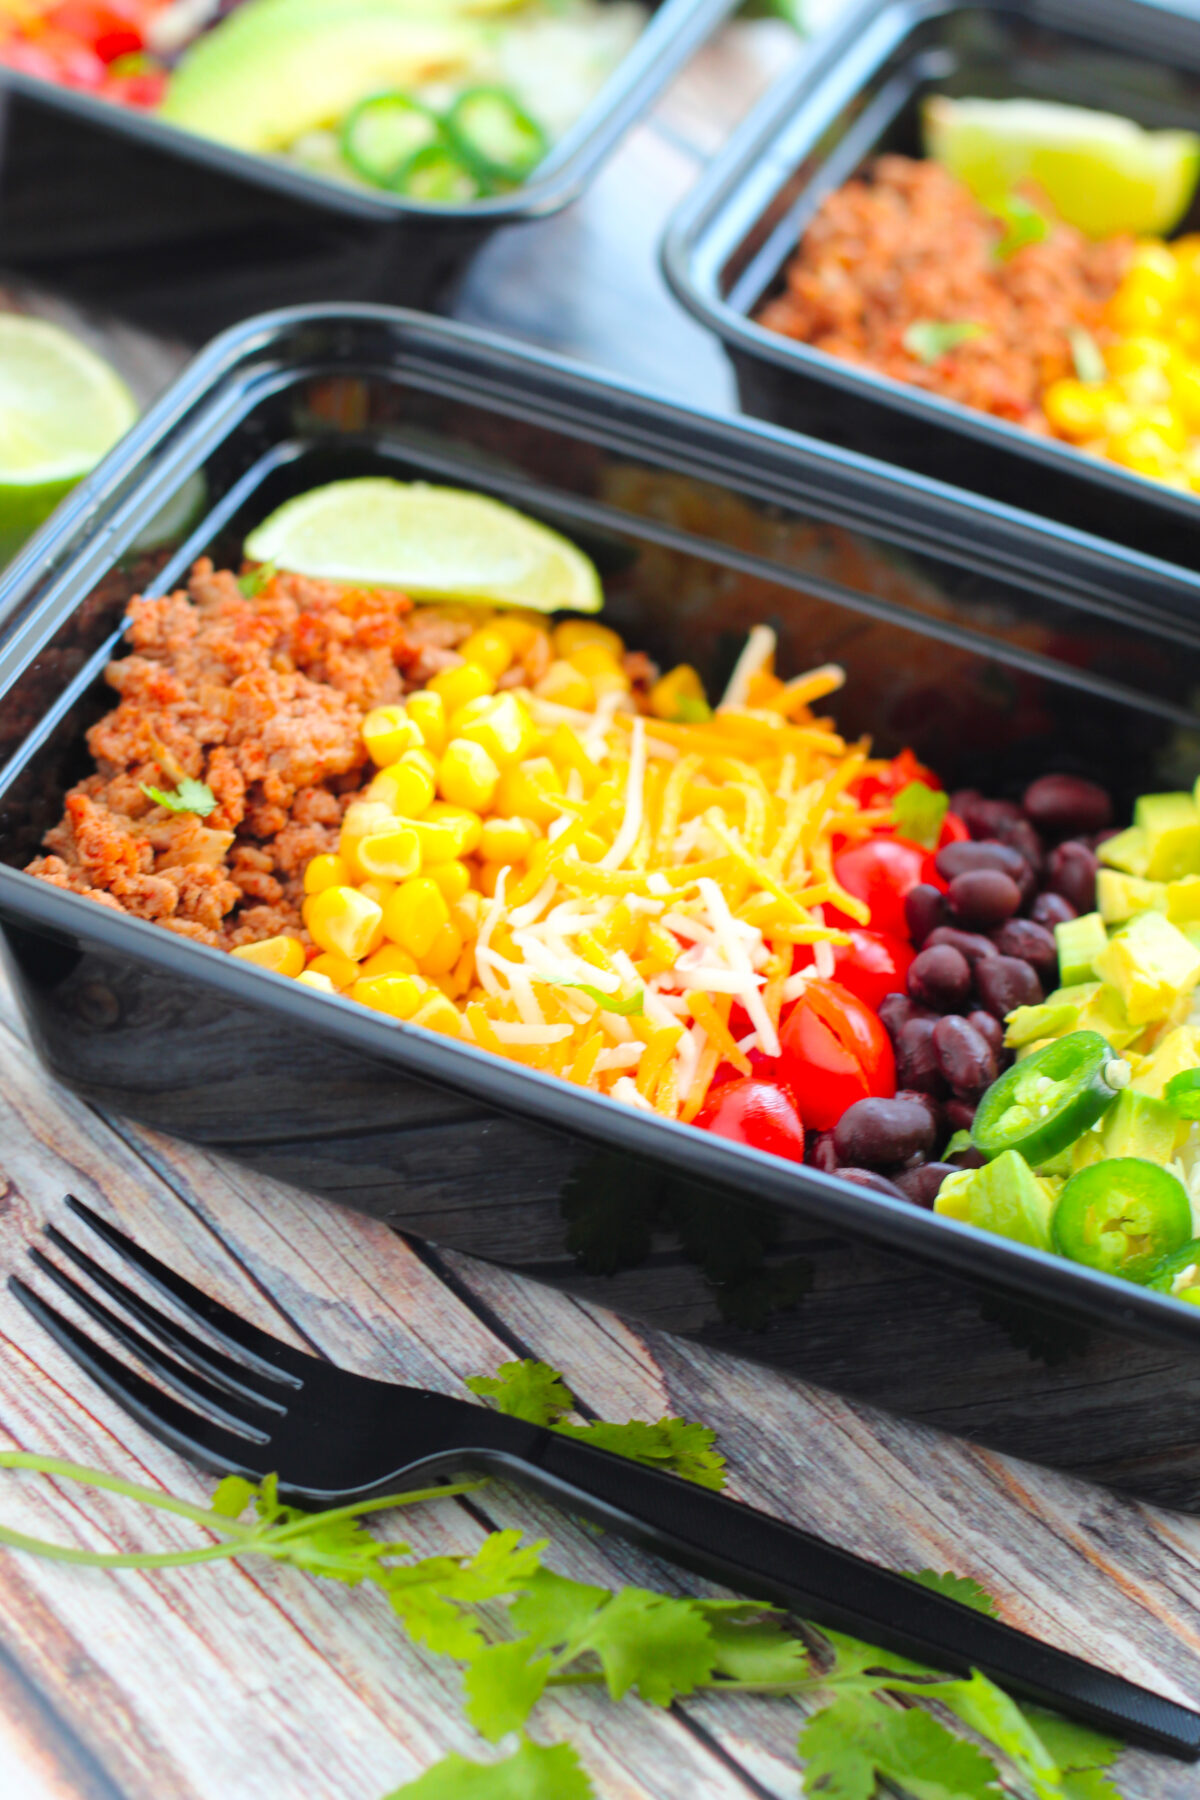 Love Mexican food? These turkey burrito meal prep bowls are perfect for you! They're healthy, delicious, and easy to make.